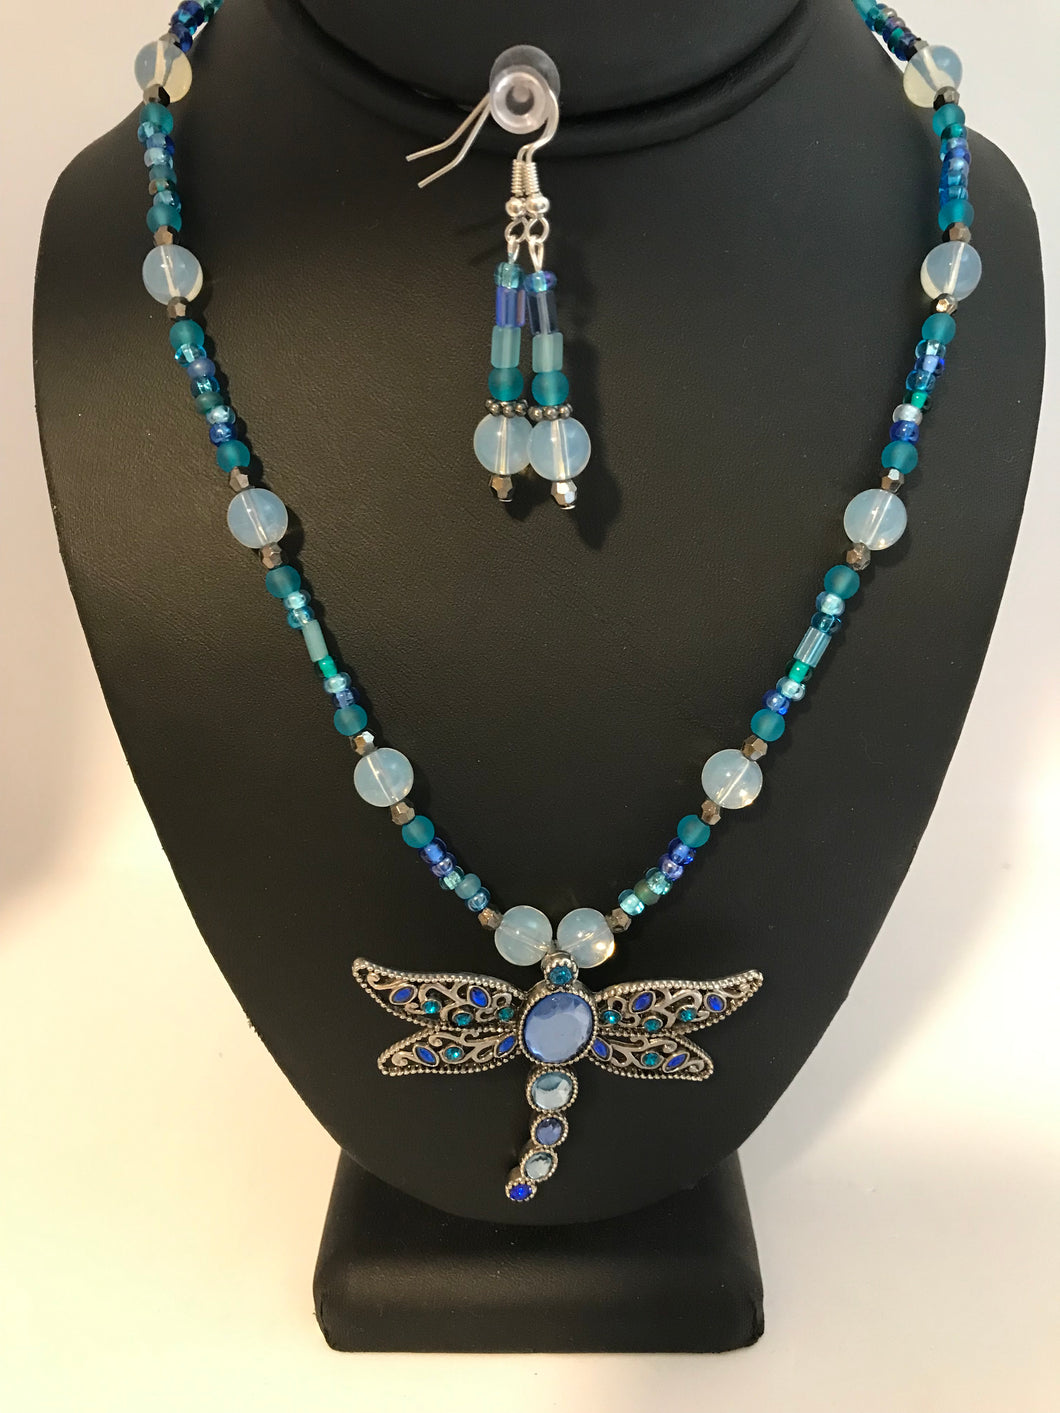 Dragonfly necklace and matching earrings set